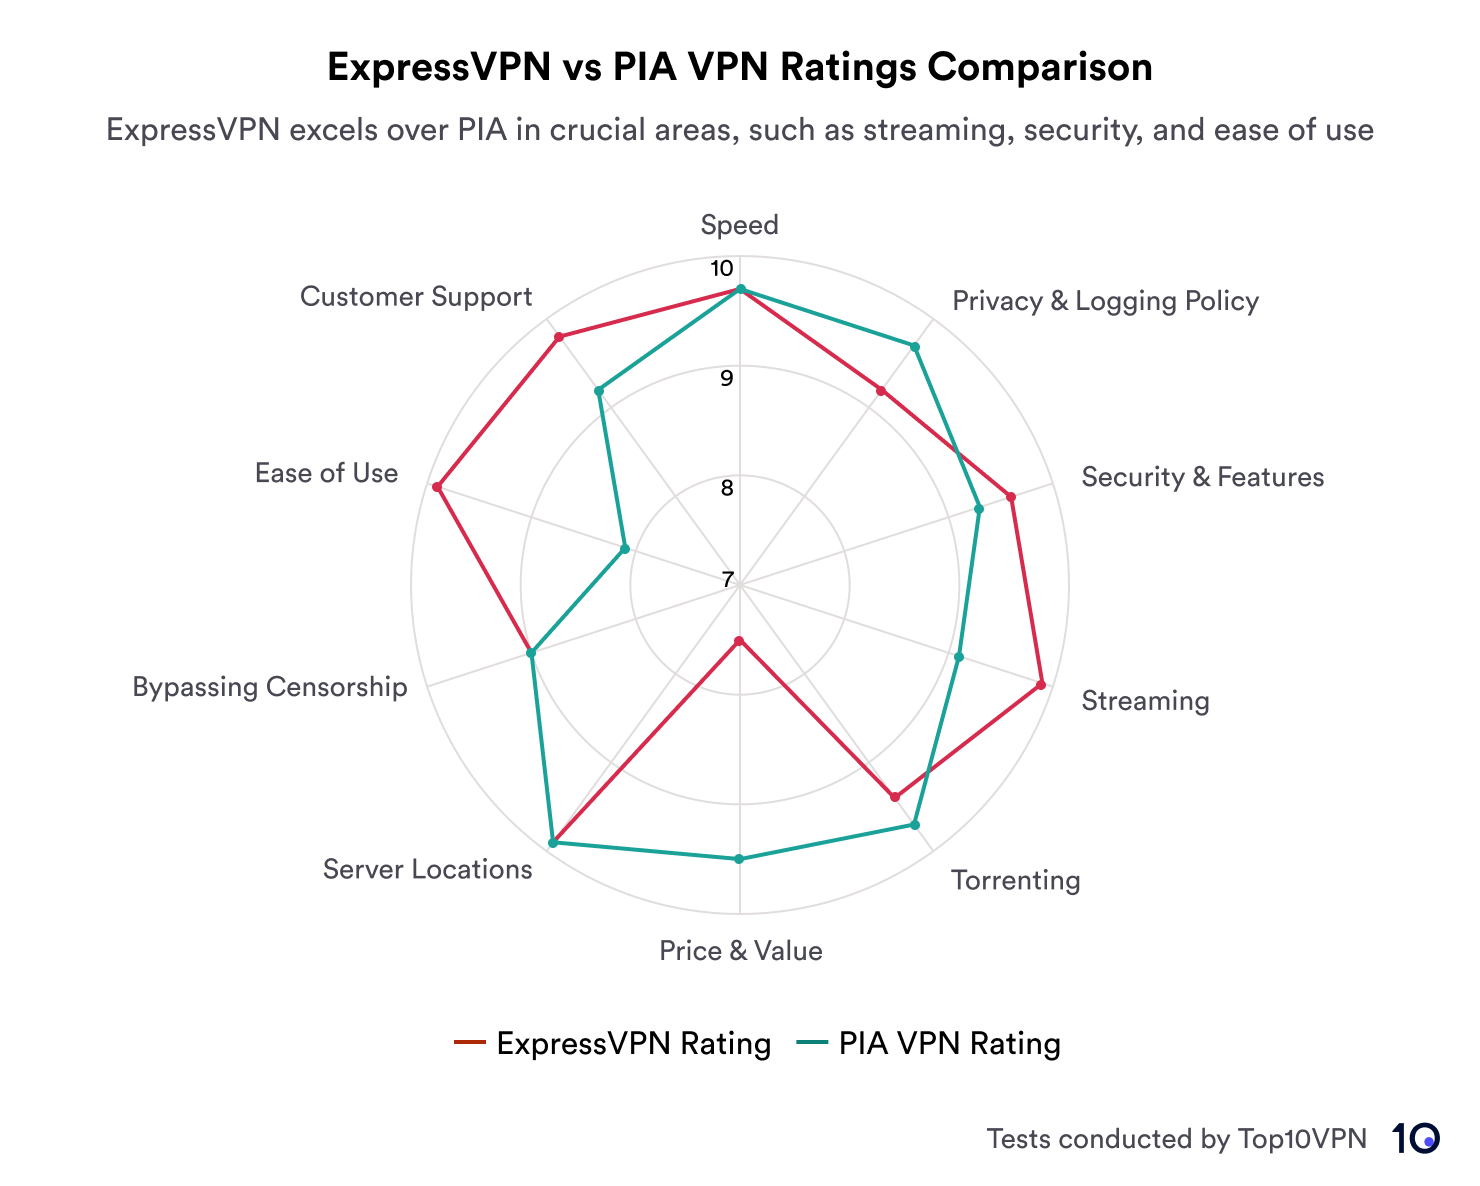 A radar chart compares ExpressVPN and PIA VPN on metrics like Speed and Streaming, with ExpressVPN generally outscoring PIA